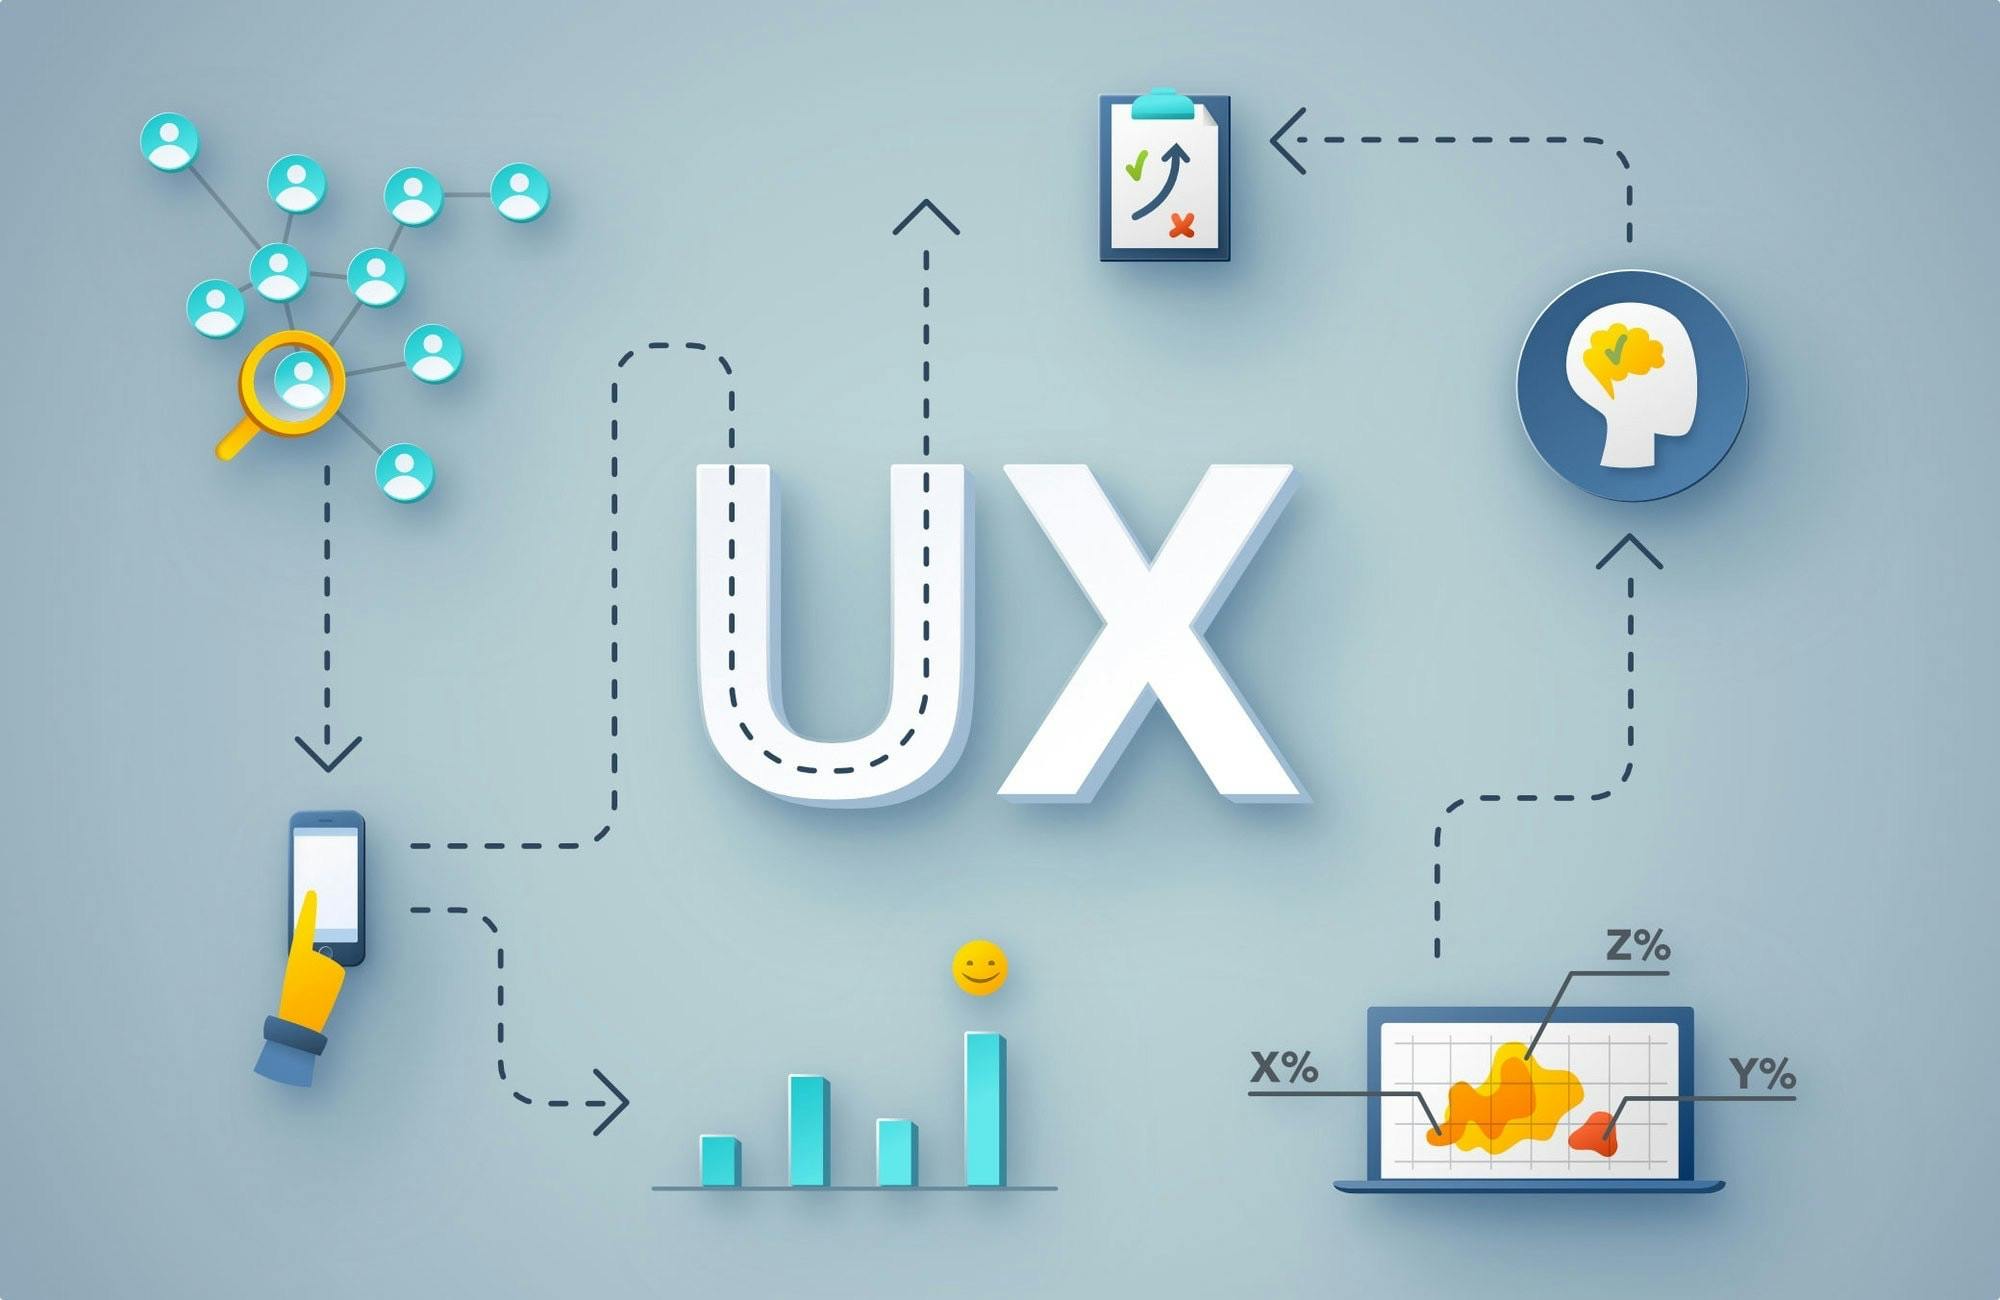 featured image - How to WOW Users With Intuitive UX Design